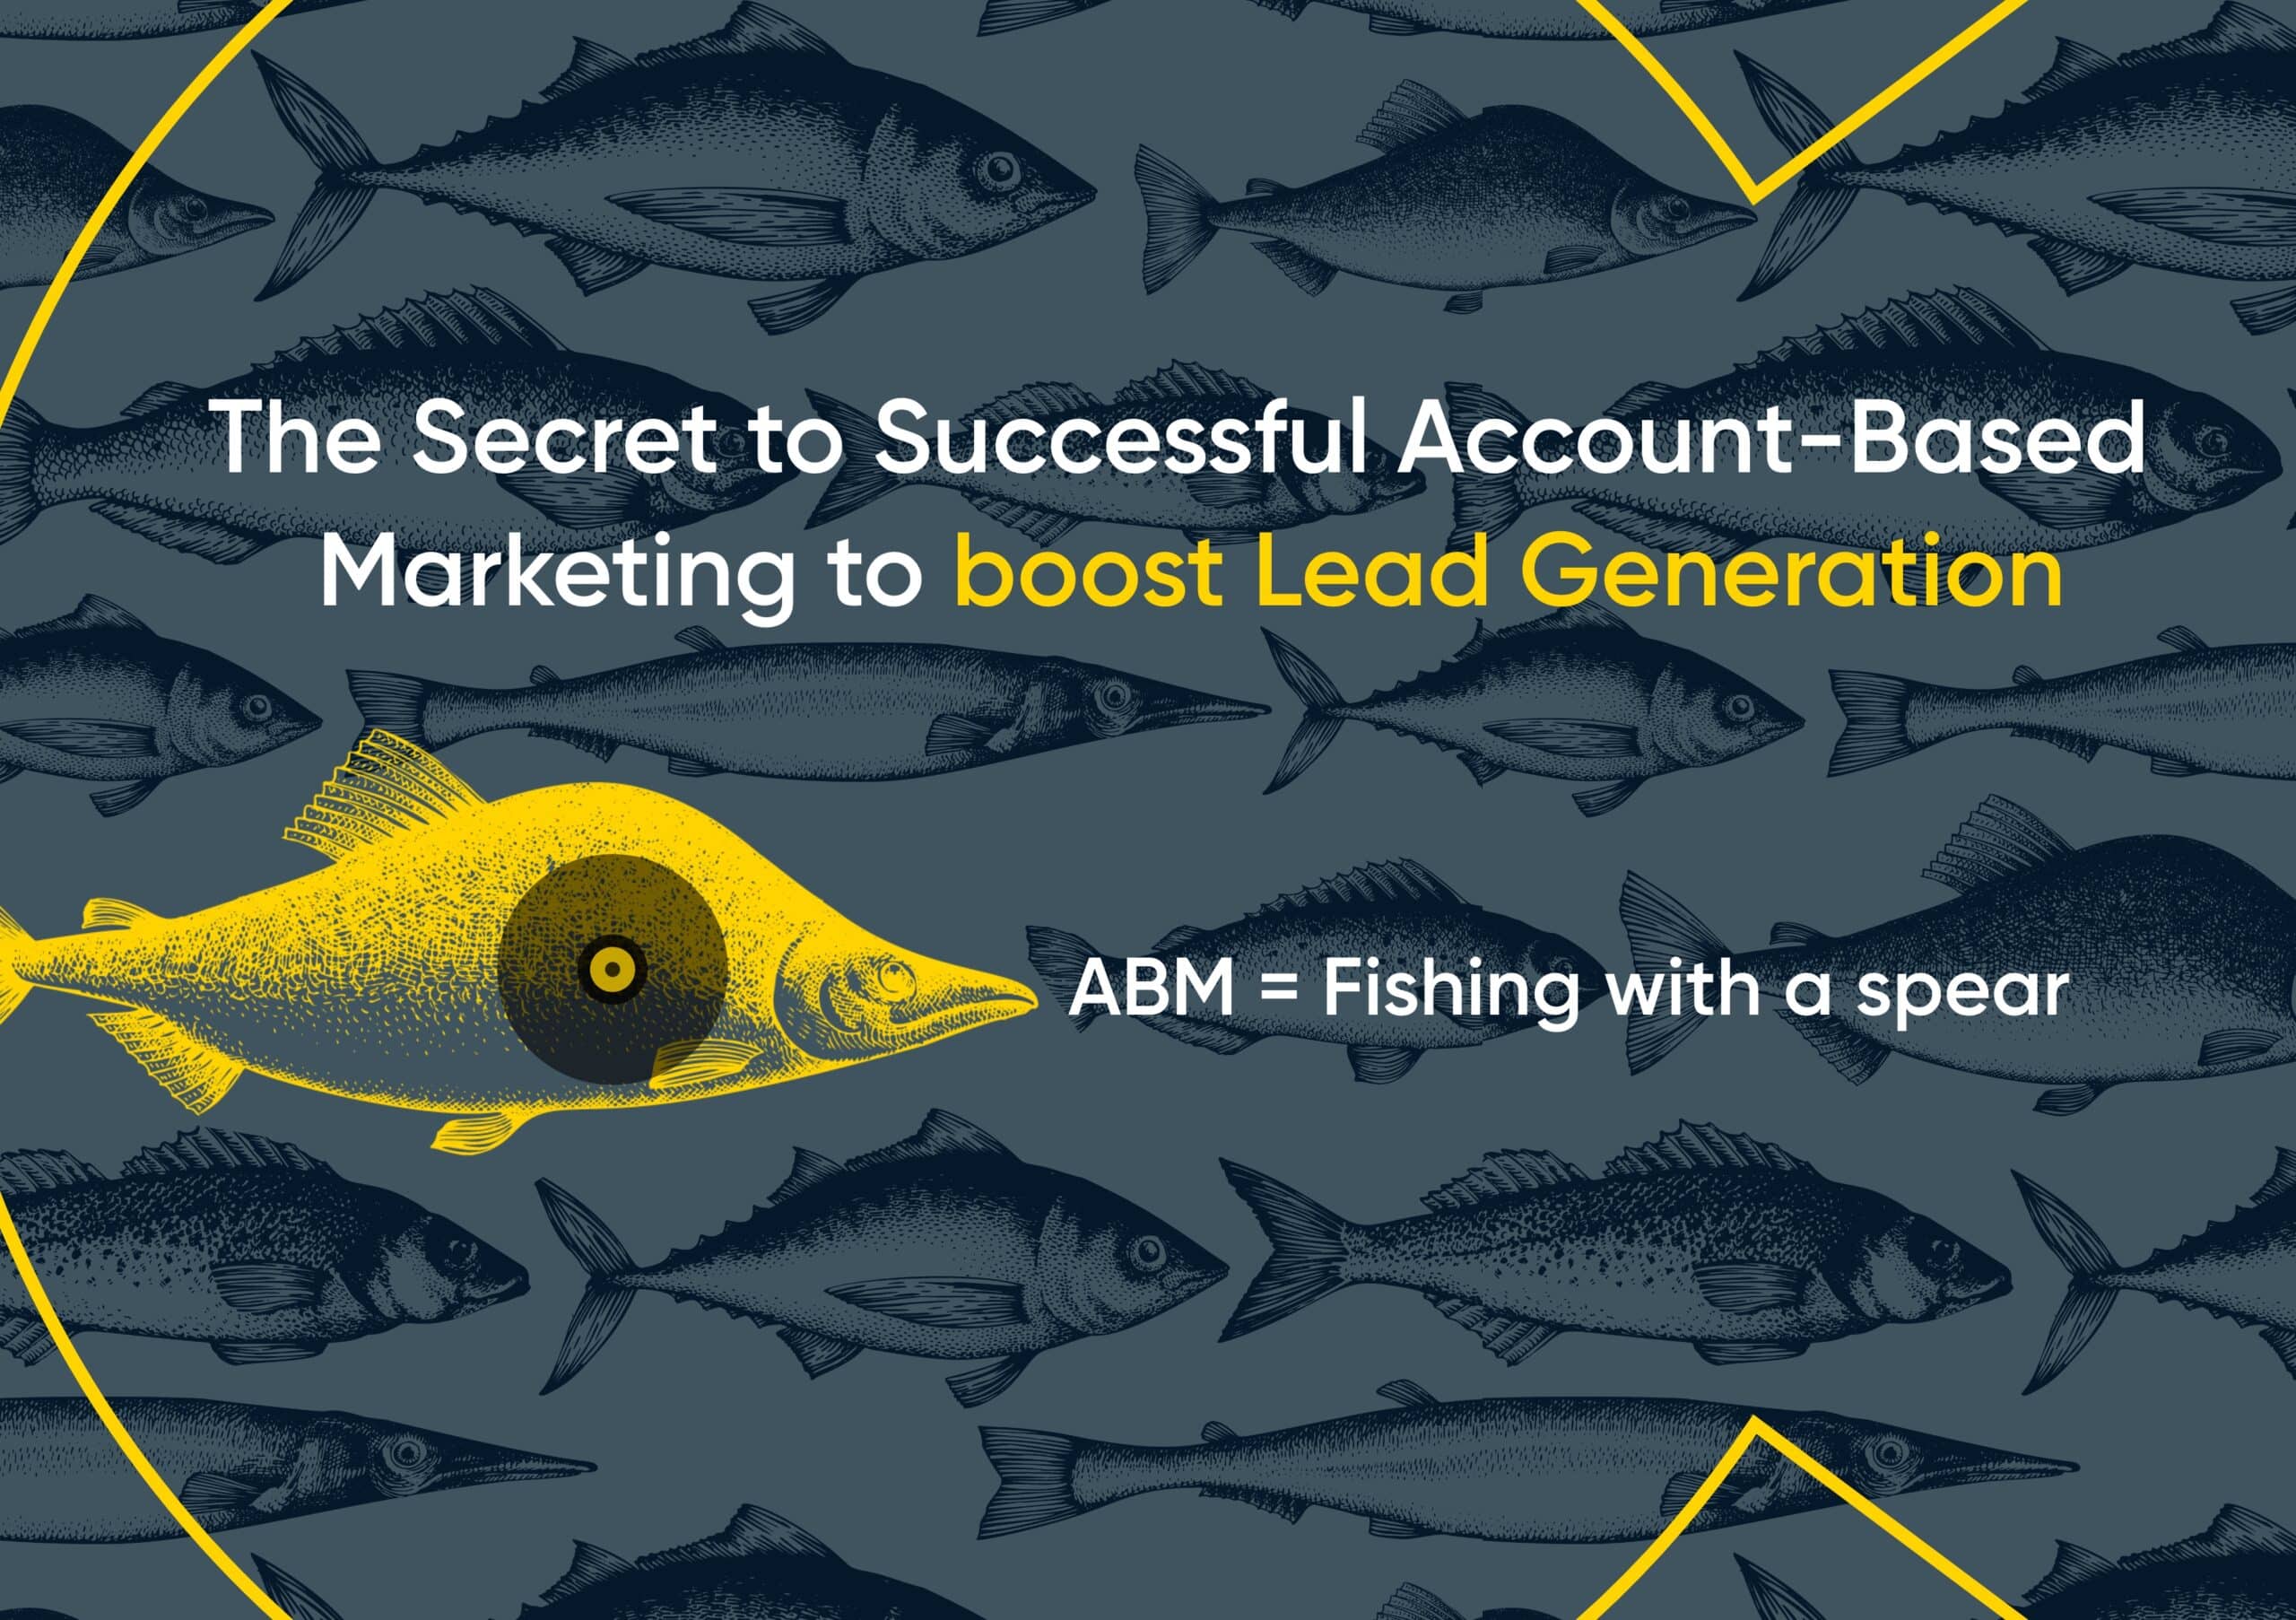 The Secret to Successful Account-Based Marketing